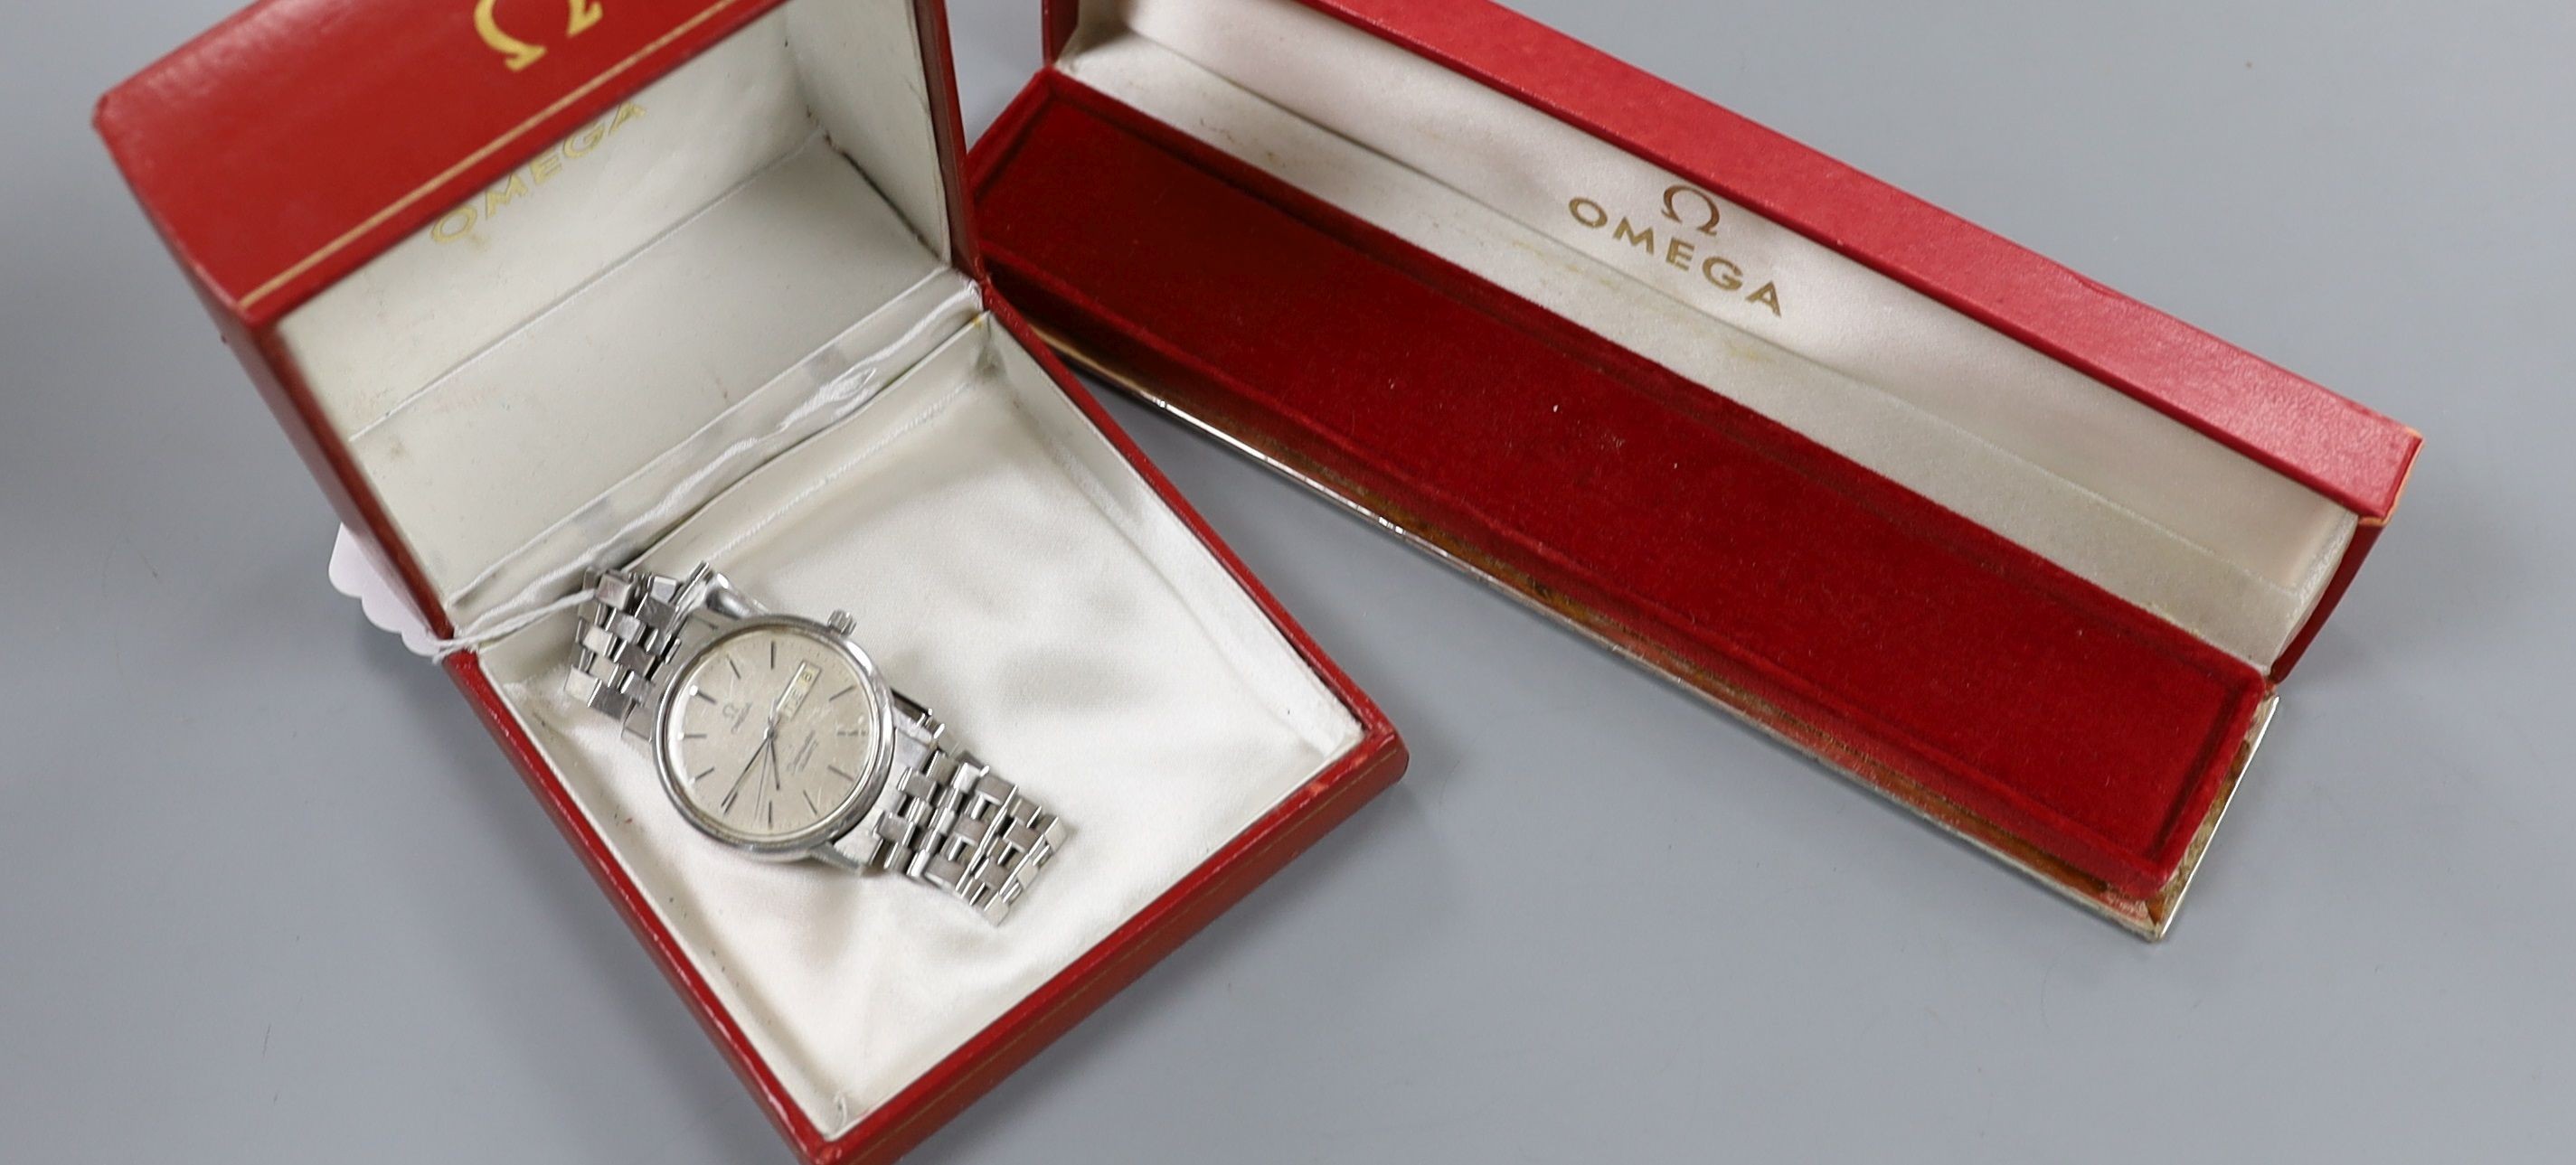 A gentleman's stainless steel Omega Seamaster quartz wrist watch, on Omega bracelet, with two Omega boxes.